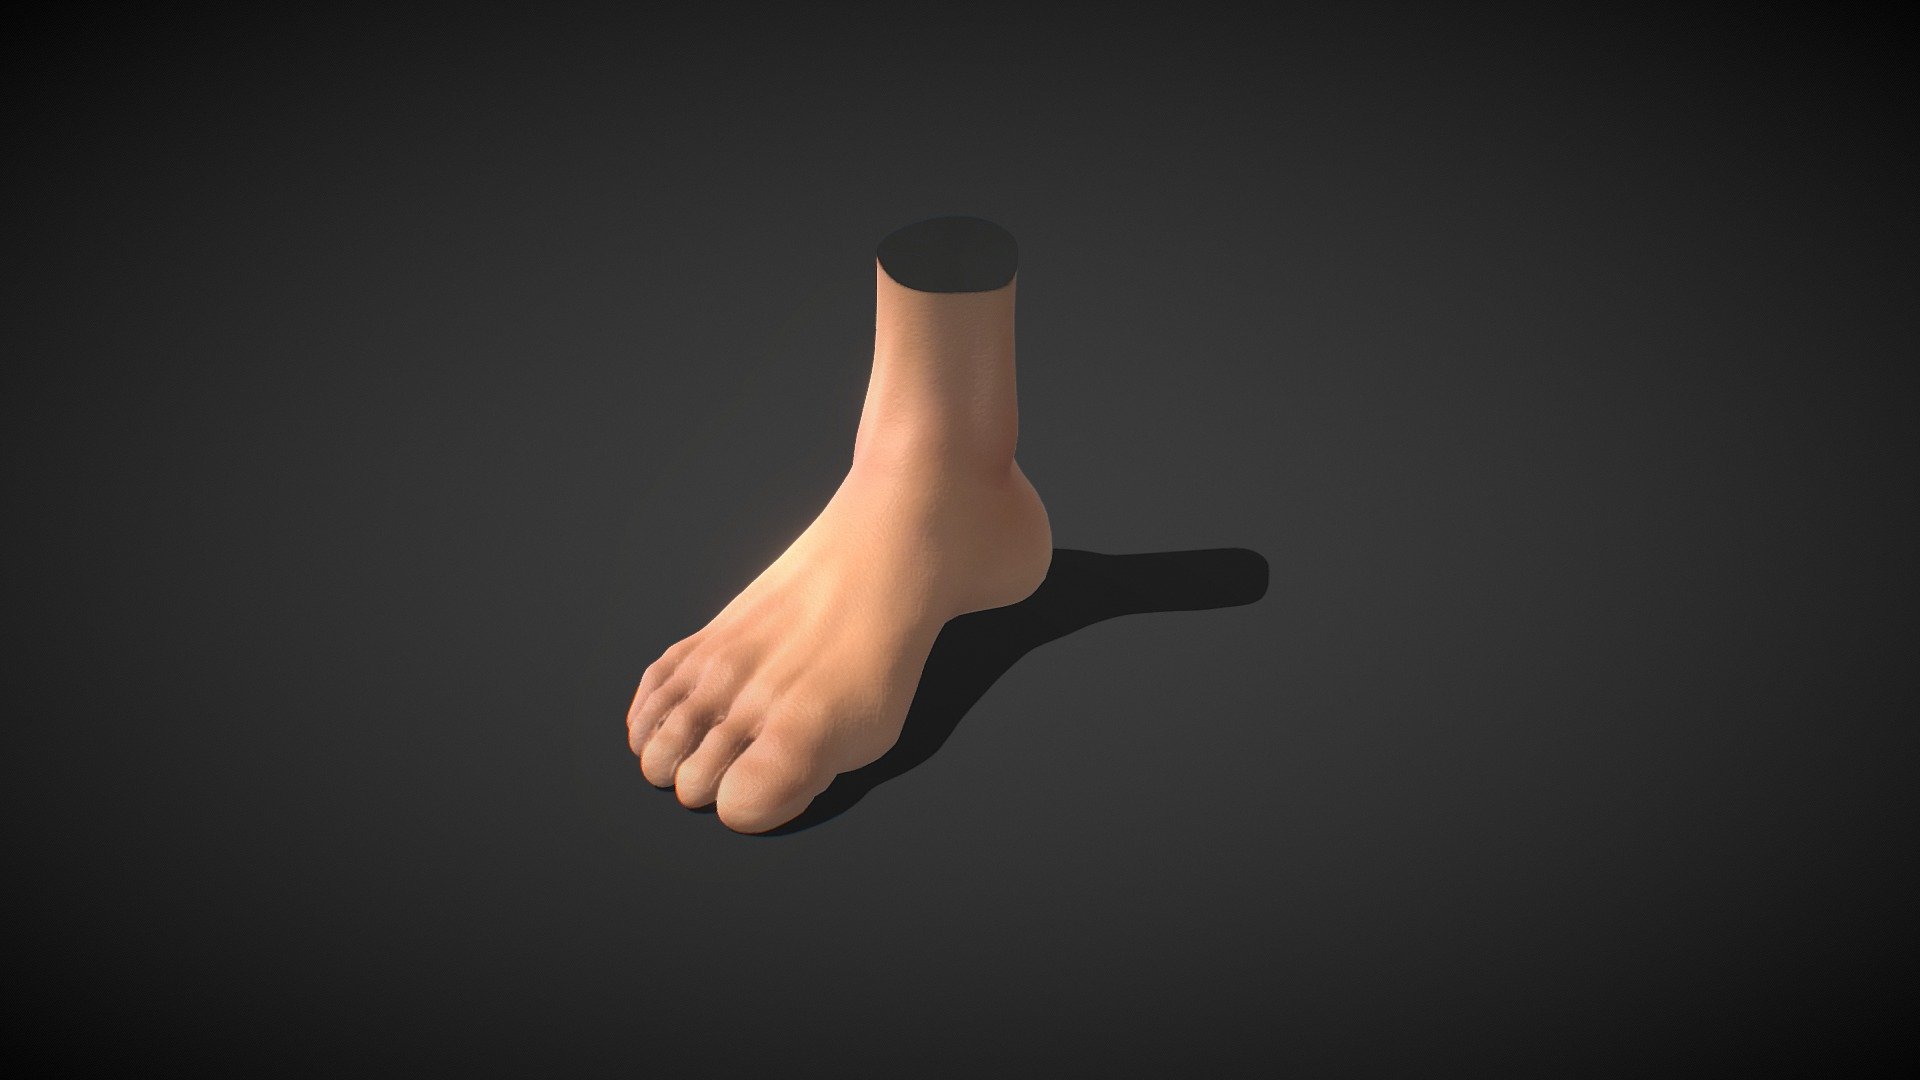 Full Male Body parts pack  is available here - https://skfb.ly/o8EXW

Female Version - https://skfb.ly/o8XWu

A Fit male Anatomical Foot with Basic Textures.
Perfect for simulating tattoos and use in Procreate 3D

For Procreate Make sure to download and use the USDZ file if you want to automatically load the model with color texture, otherwise use the OBJ - Fit Male Anatomy - Foot base mesh - Buy Royalty Free 3D model by Deftroy 3d model